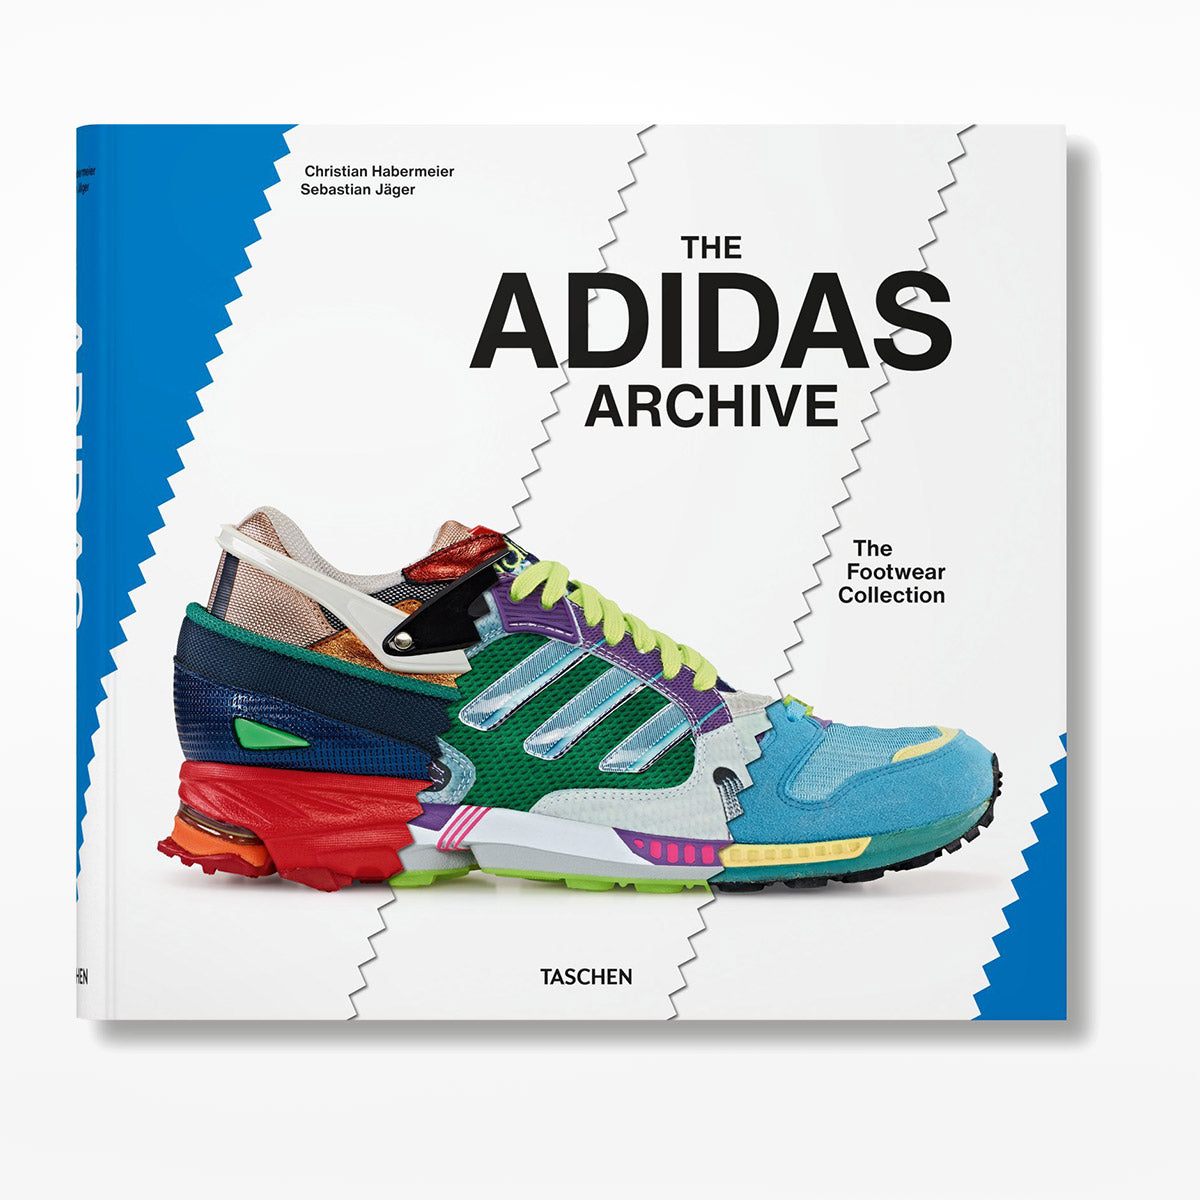 The Adidas Archive: the Footwear Collection